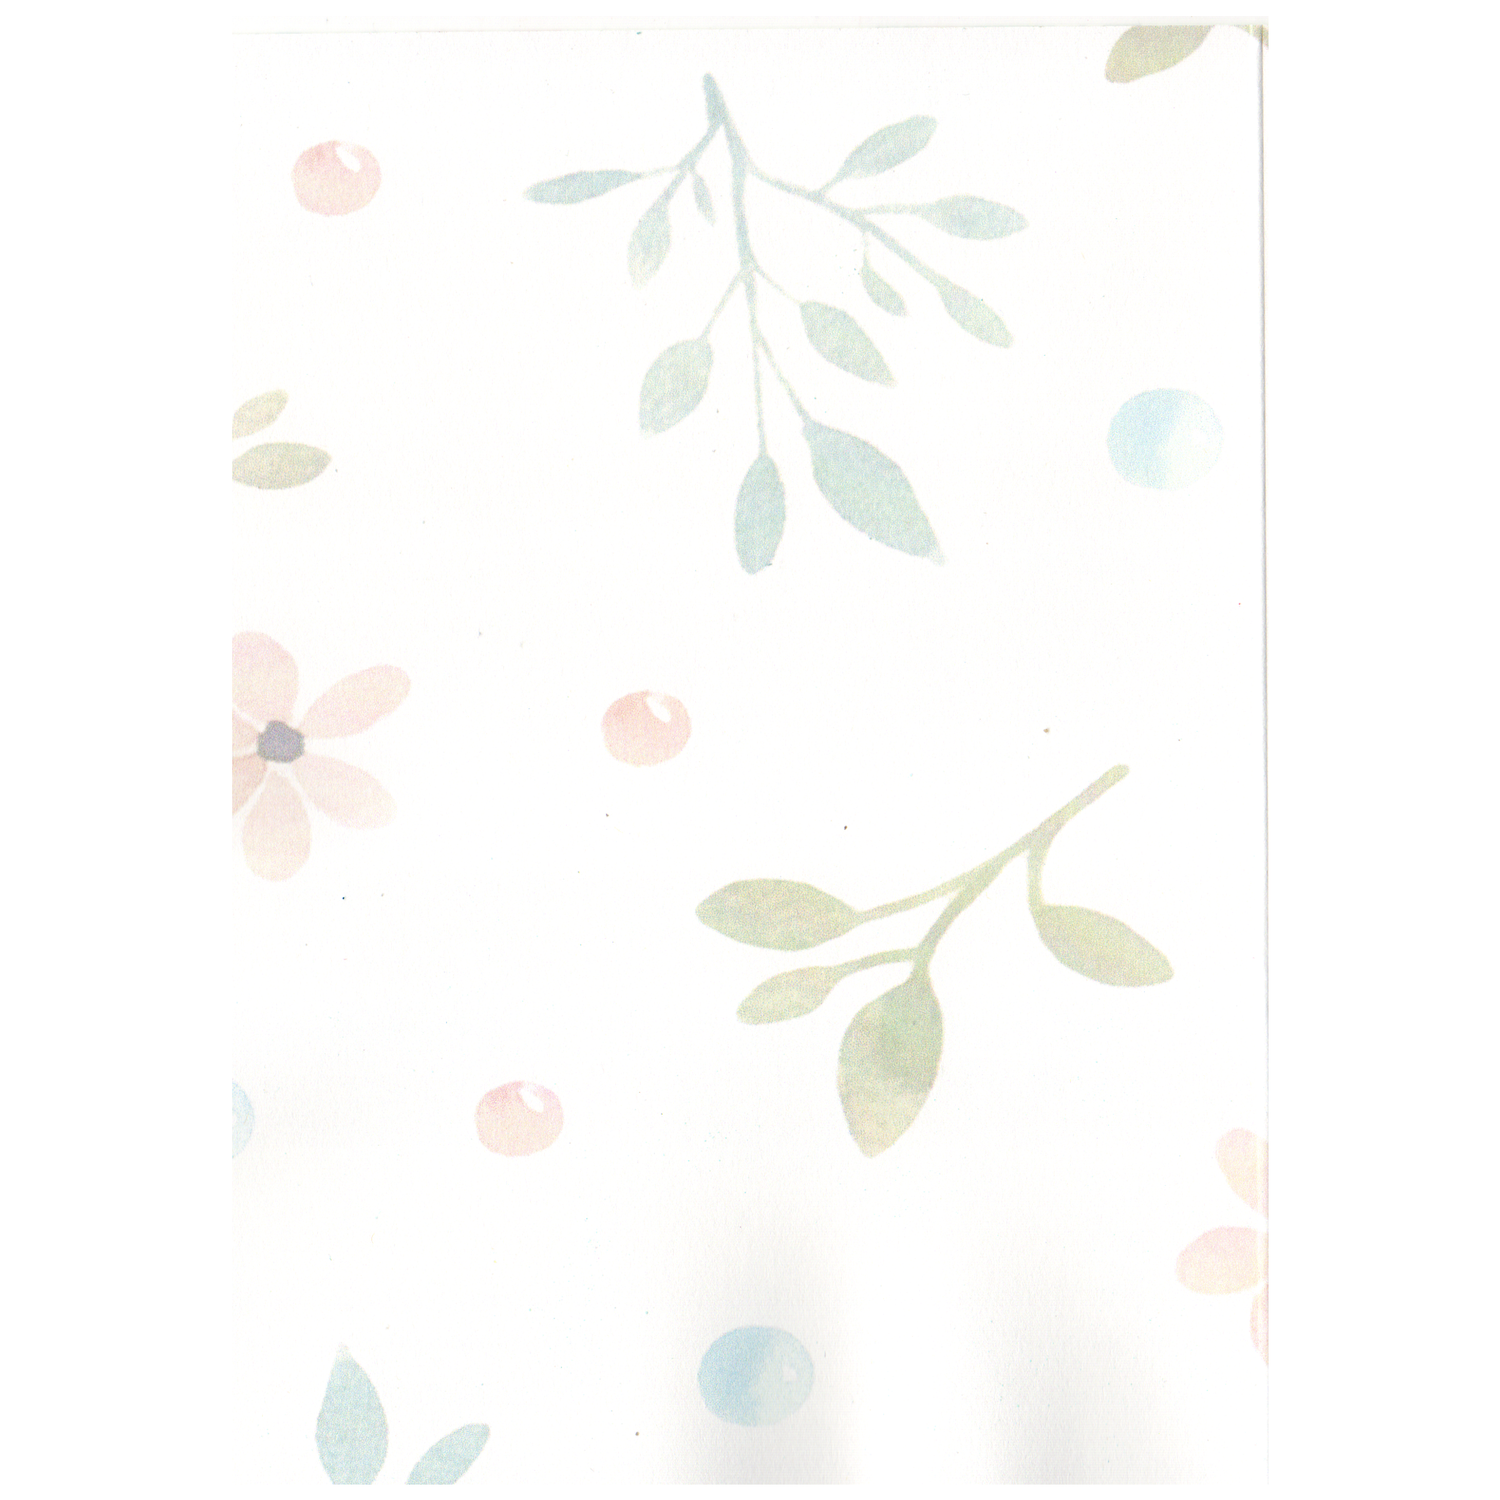 A paler version of the flowered pattern off the front of the card is featured on the inside left